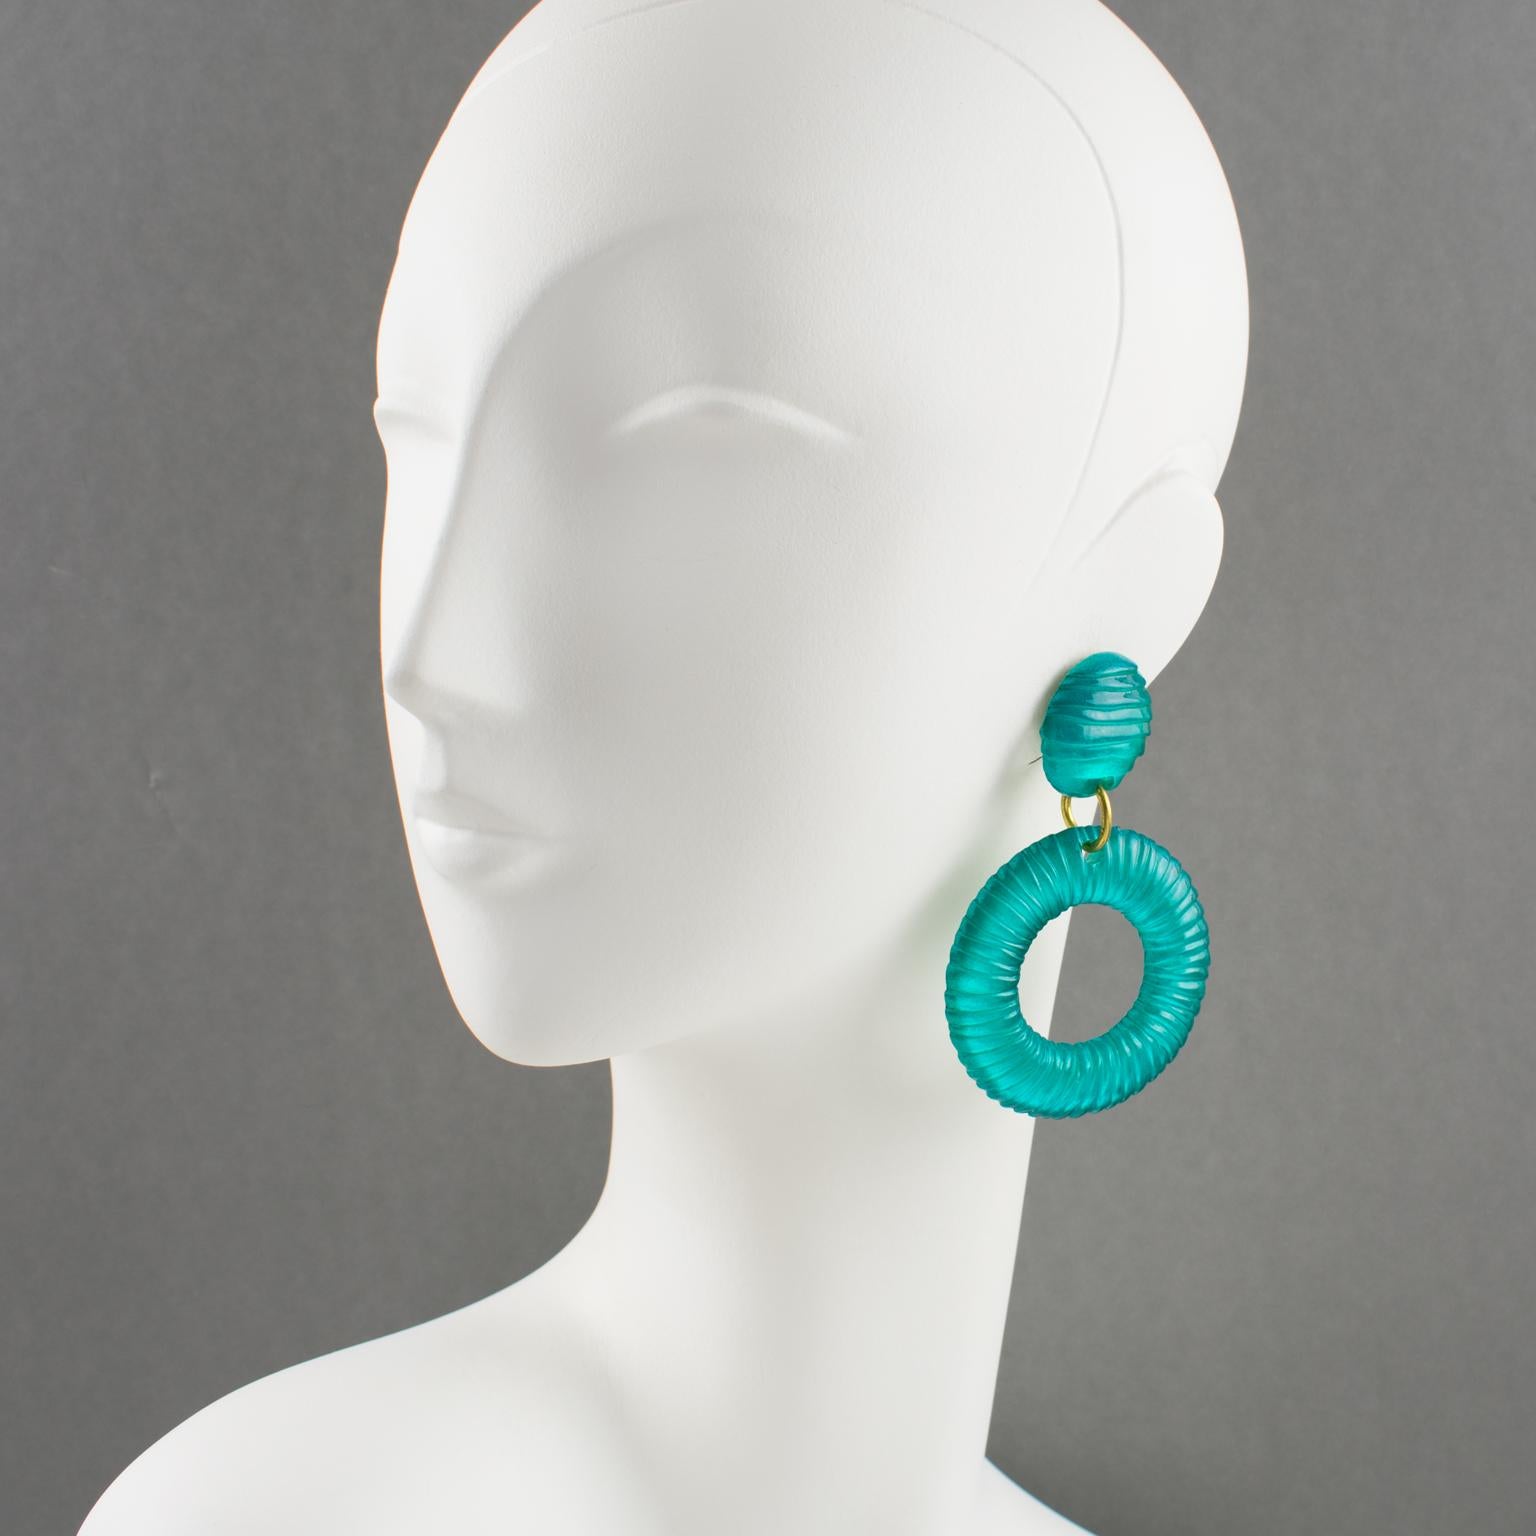 Lovely bright blue oversized lucite clip-on earrings. Large donut hoop dangling shape with a striped carved textured pattern. A bright aqua turquoise blue color on metallic gray background.
Measurements: 3.19 in. long (8 cm) x 2.13 in. wide (5.3 cm)